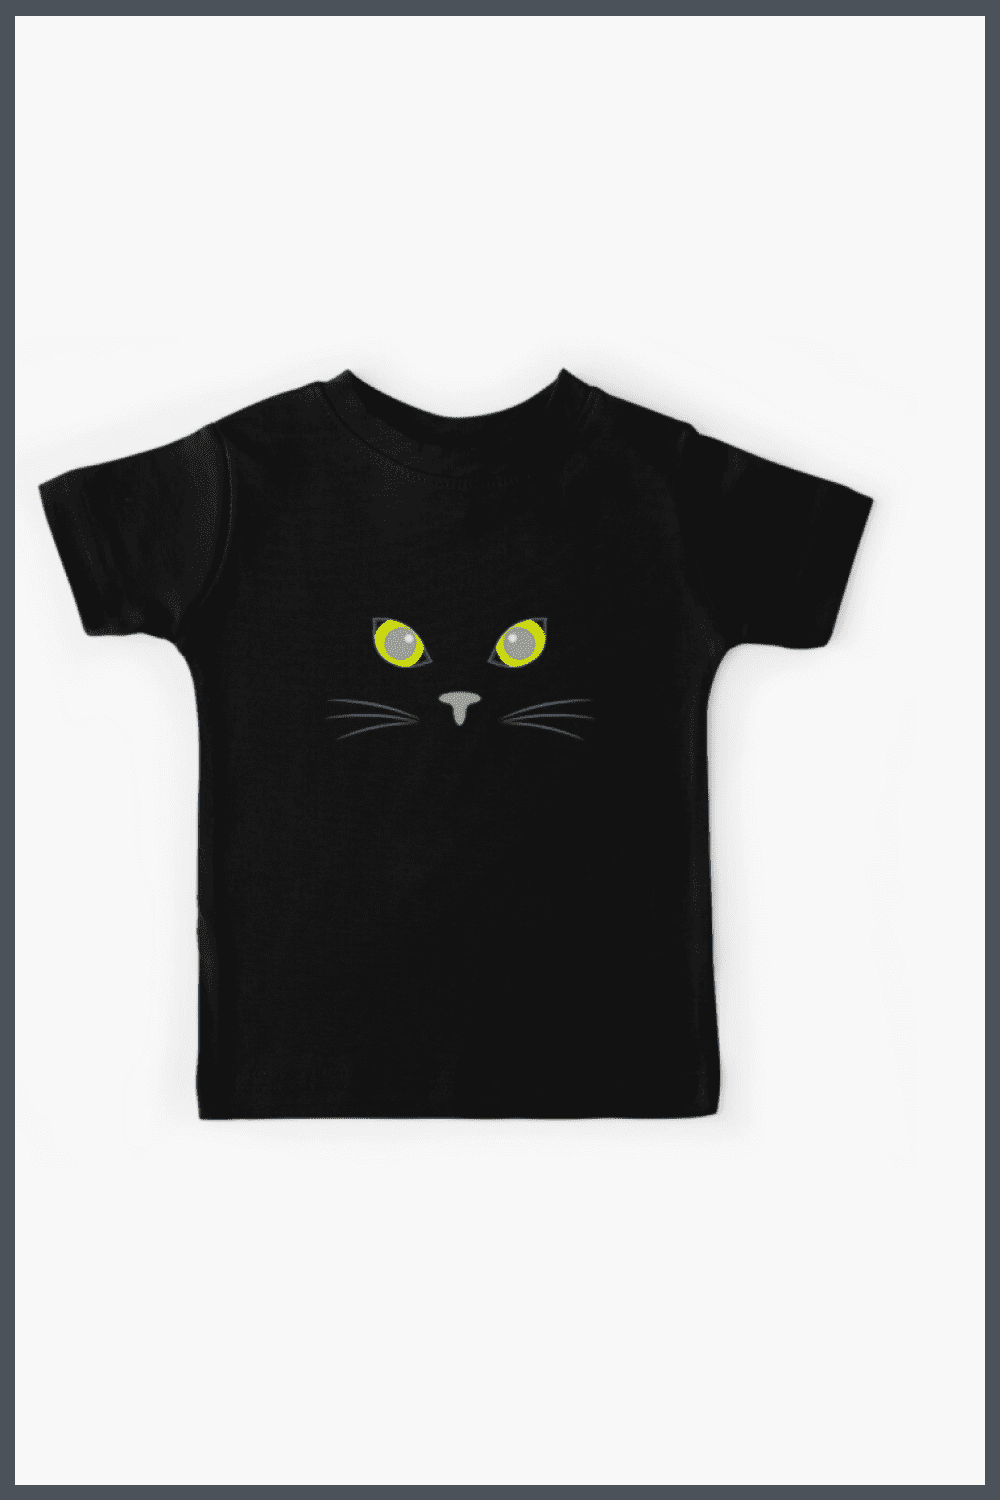 Laconic black T-shirt with a cat's face.